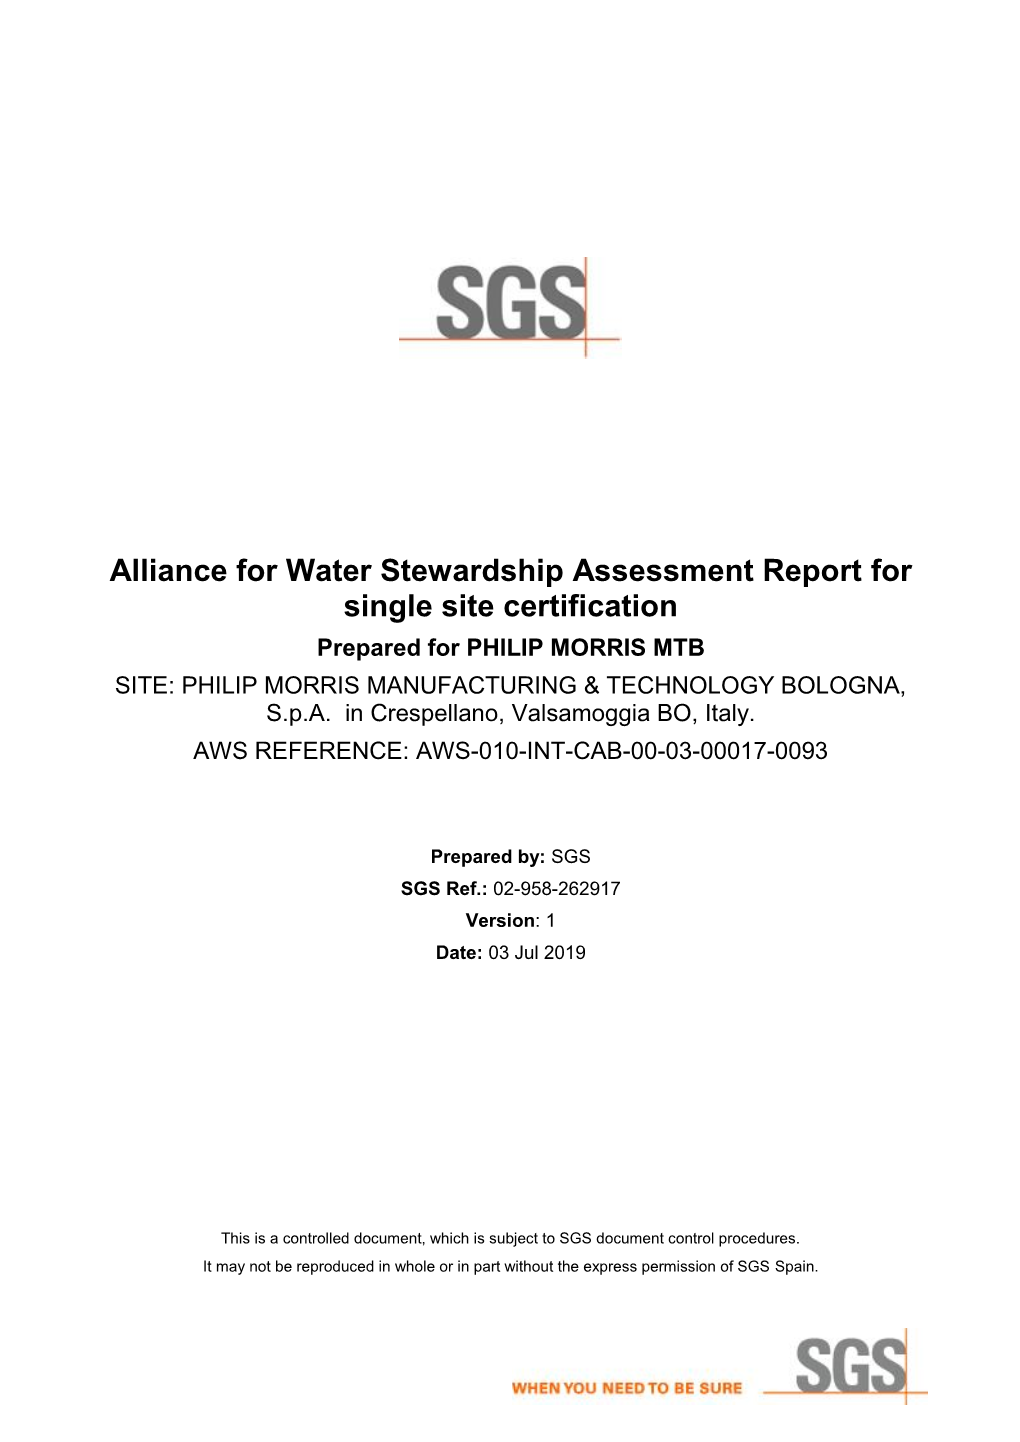 Alliance for Water Stewardship Assessment Report for Single Site